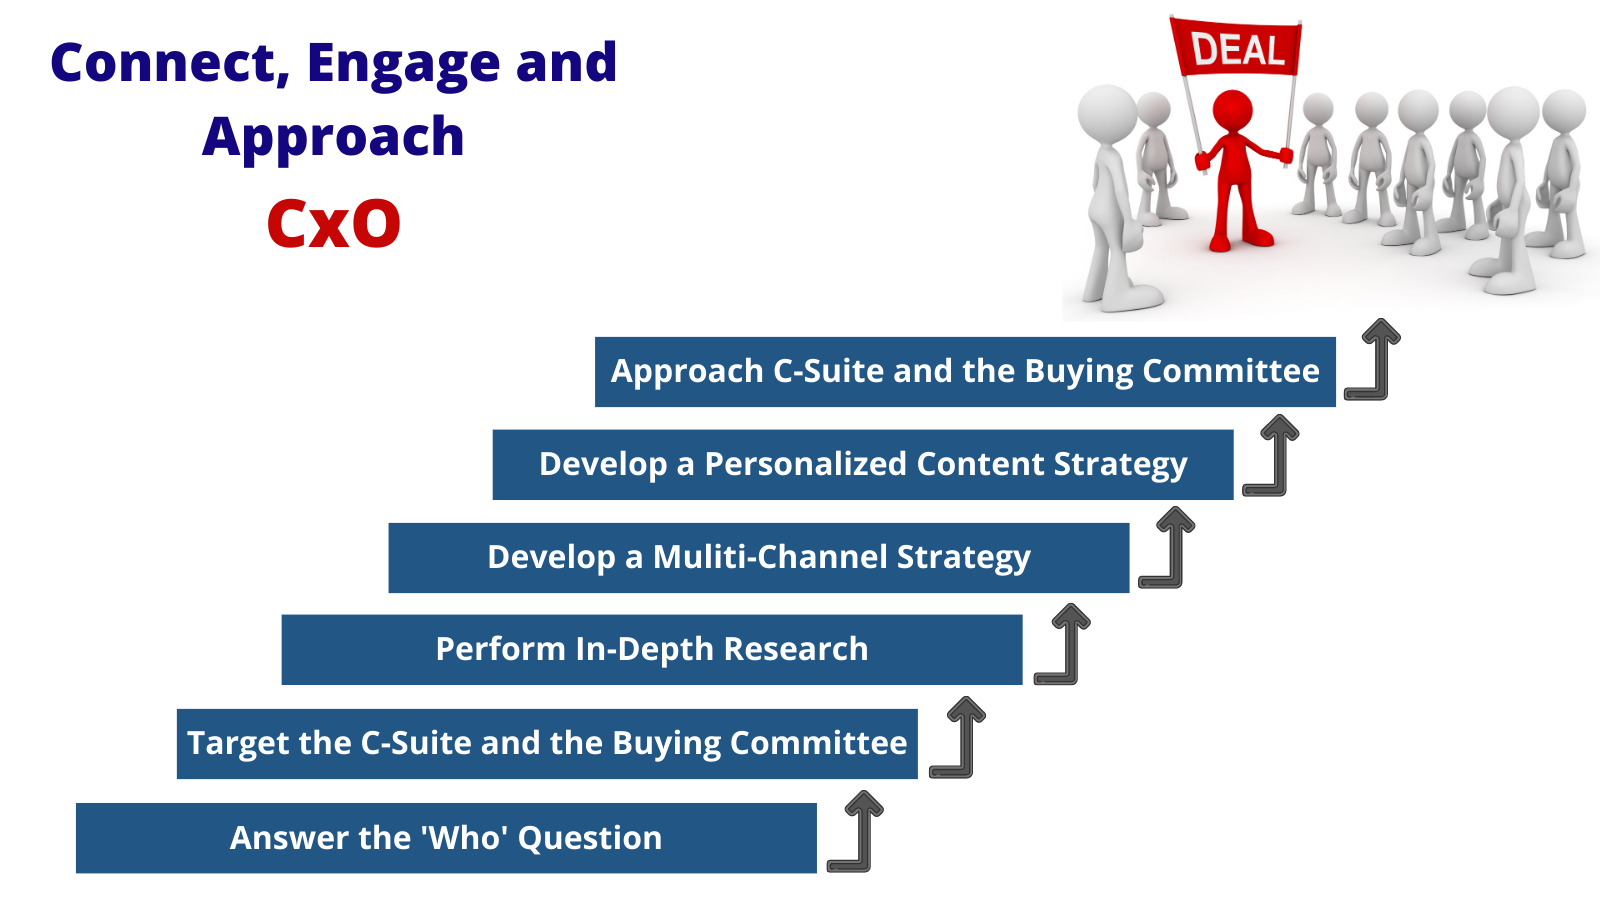 Connect, engage and approach CxOs